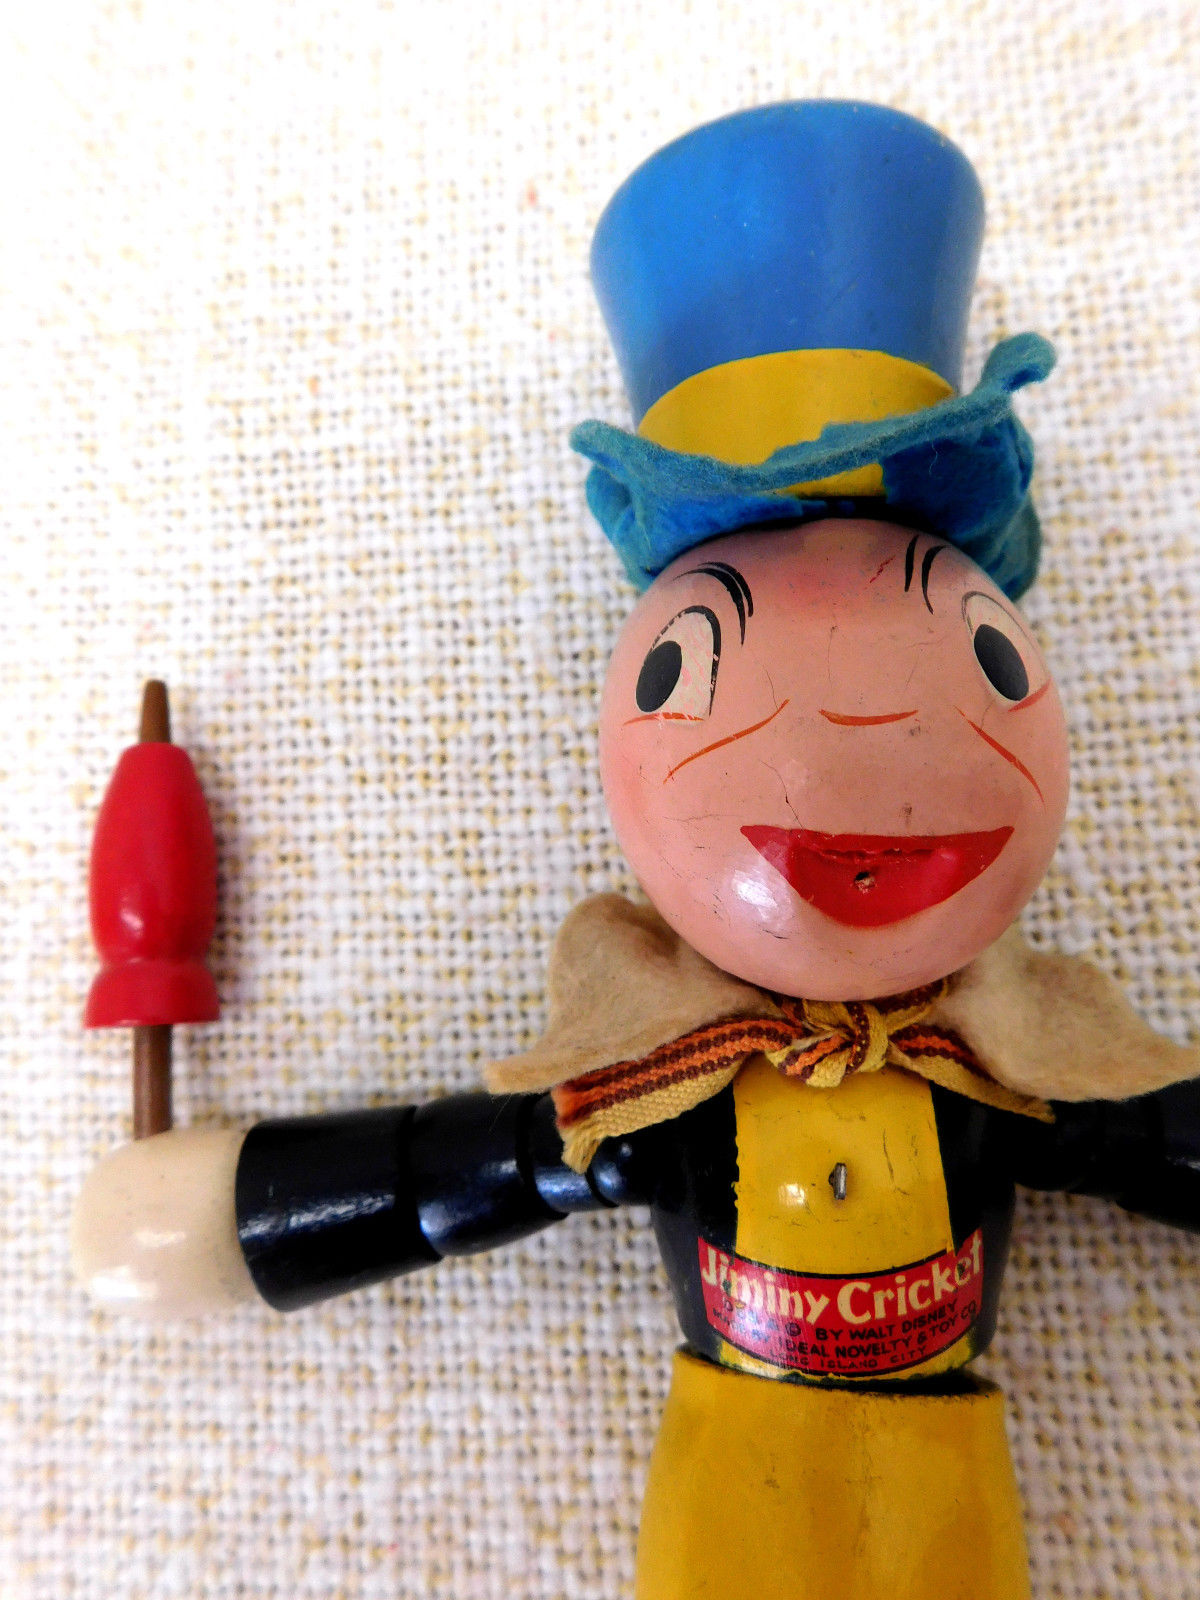 Antique Vintage Disney Toy Ideal Wooden Jointed Doll Jiminy Cricket ...